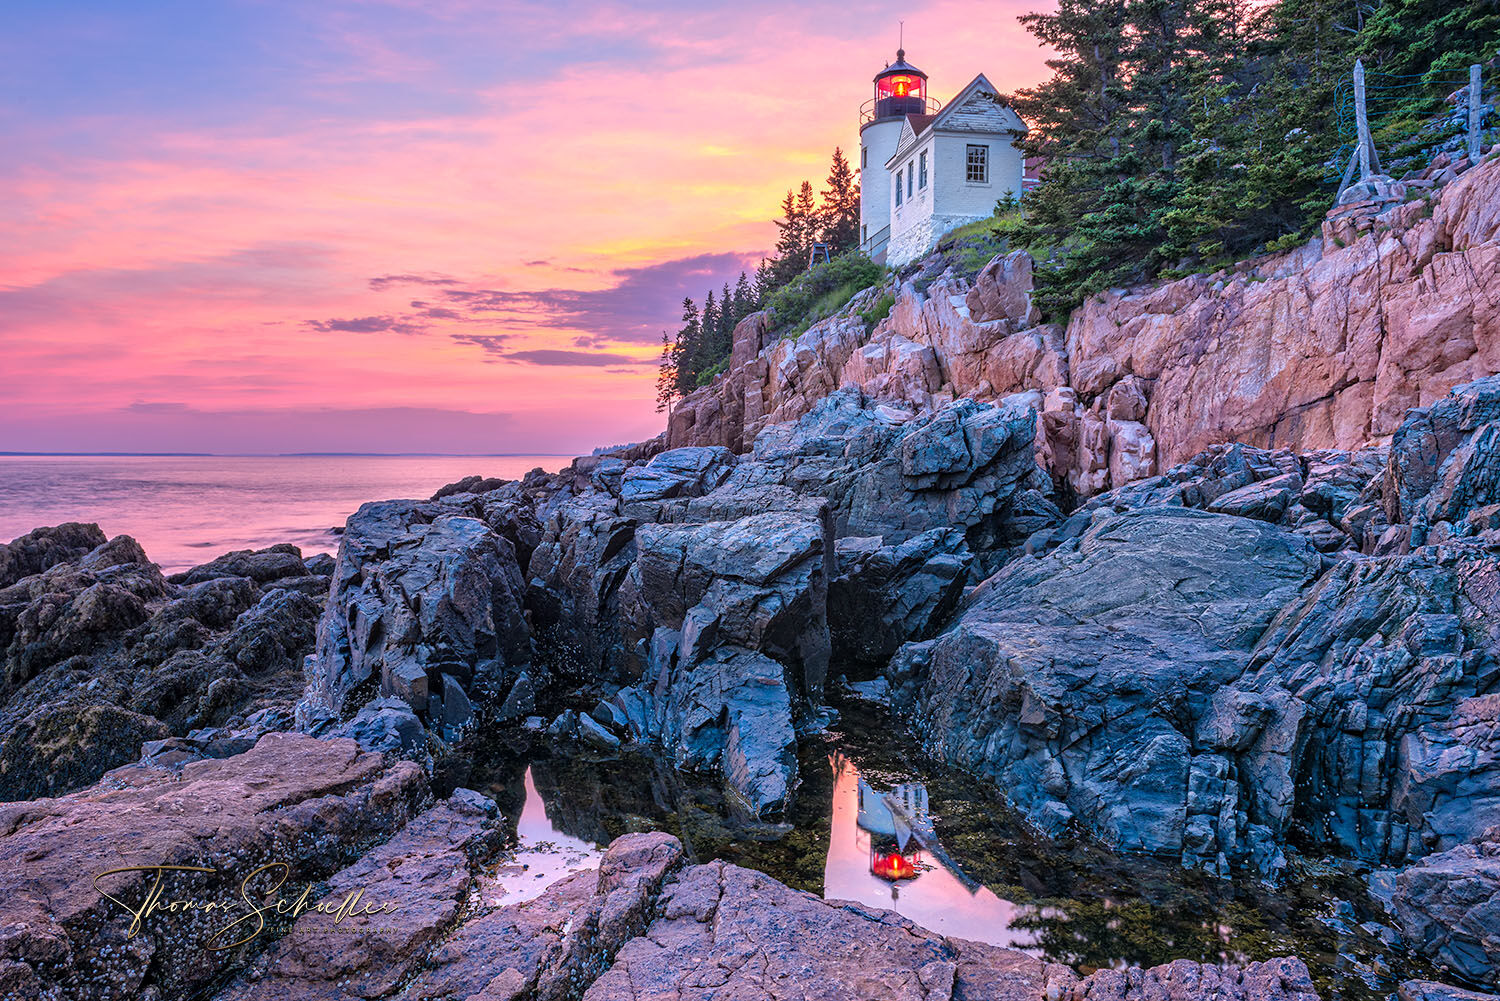 The Bass Head Lighthouse overlooking Maine's Bass Harbor during a fiery red sunset | Nautical Seascape Fine Art Prints for sale